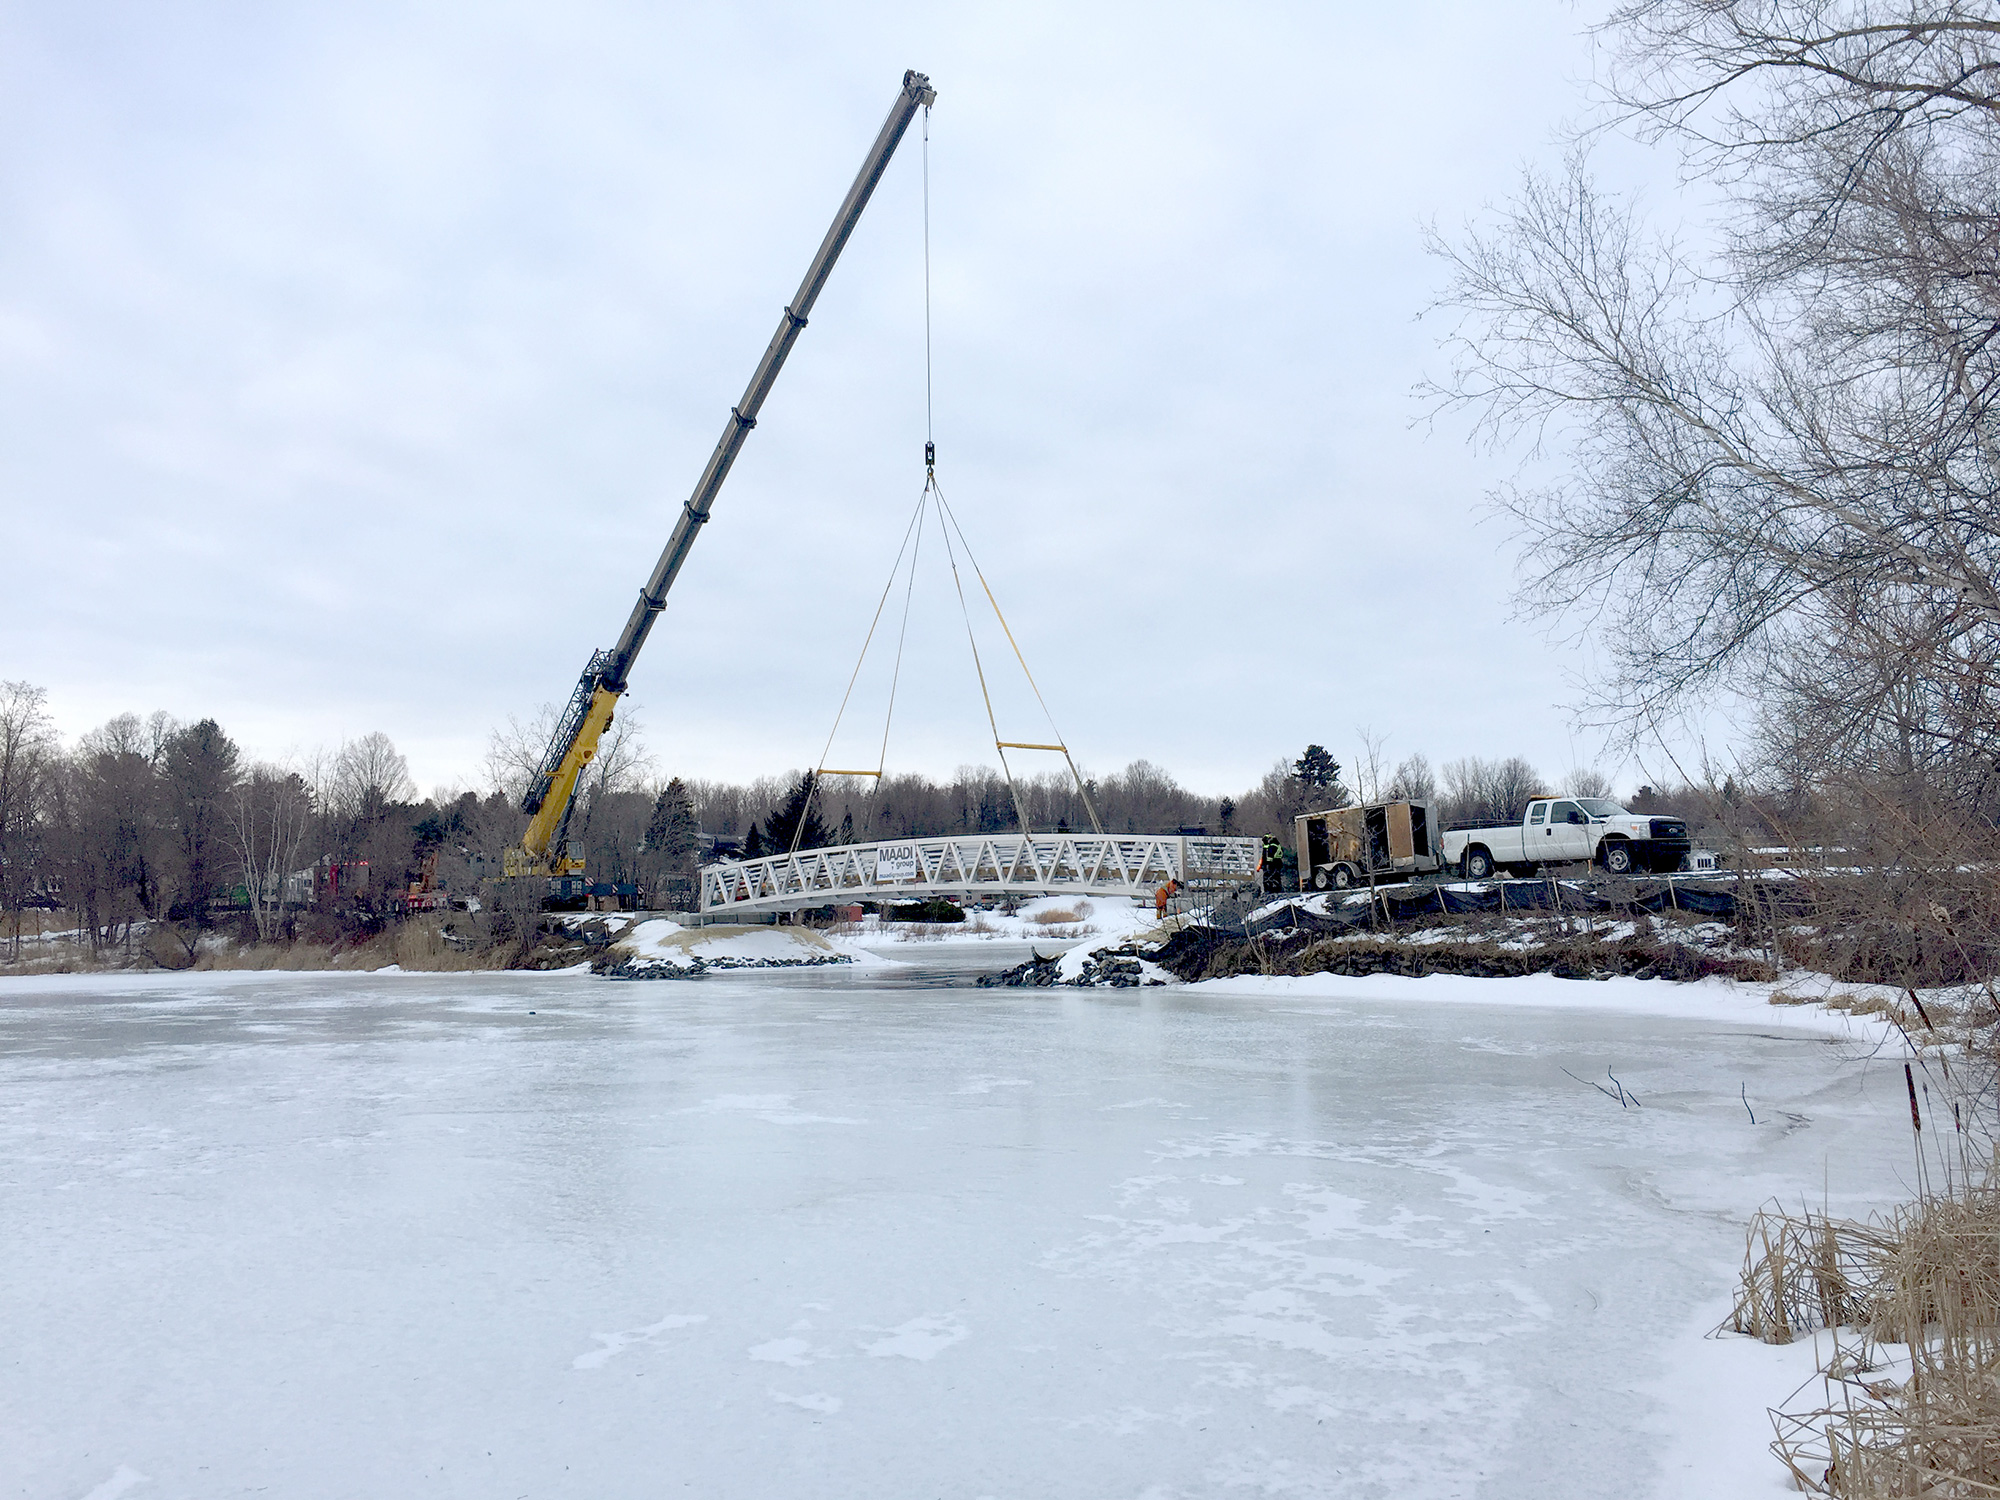 Prefabricated custom footbridge being lowered into place by crane in icy winter conditions